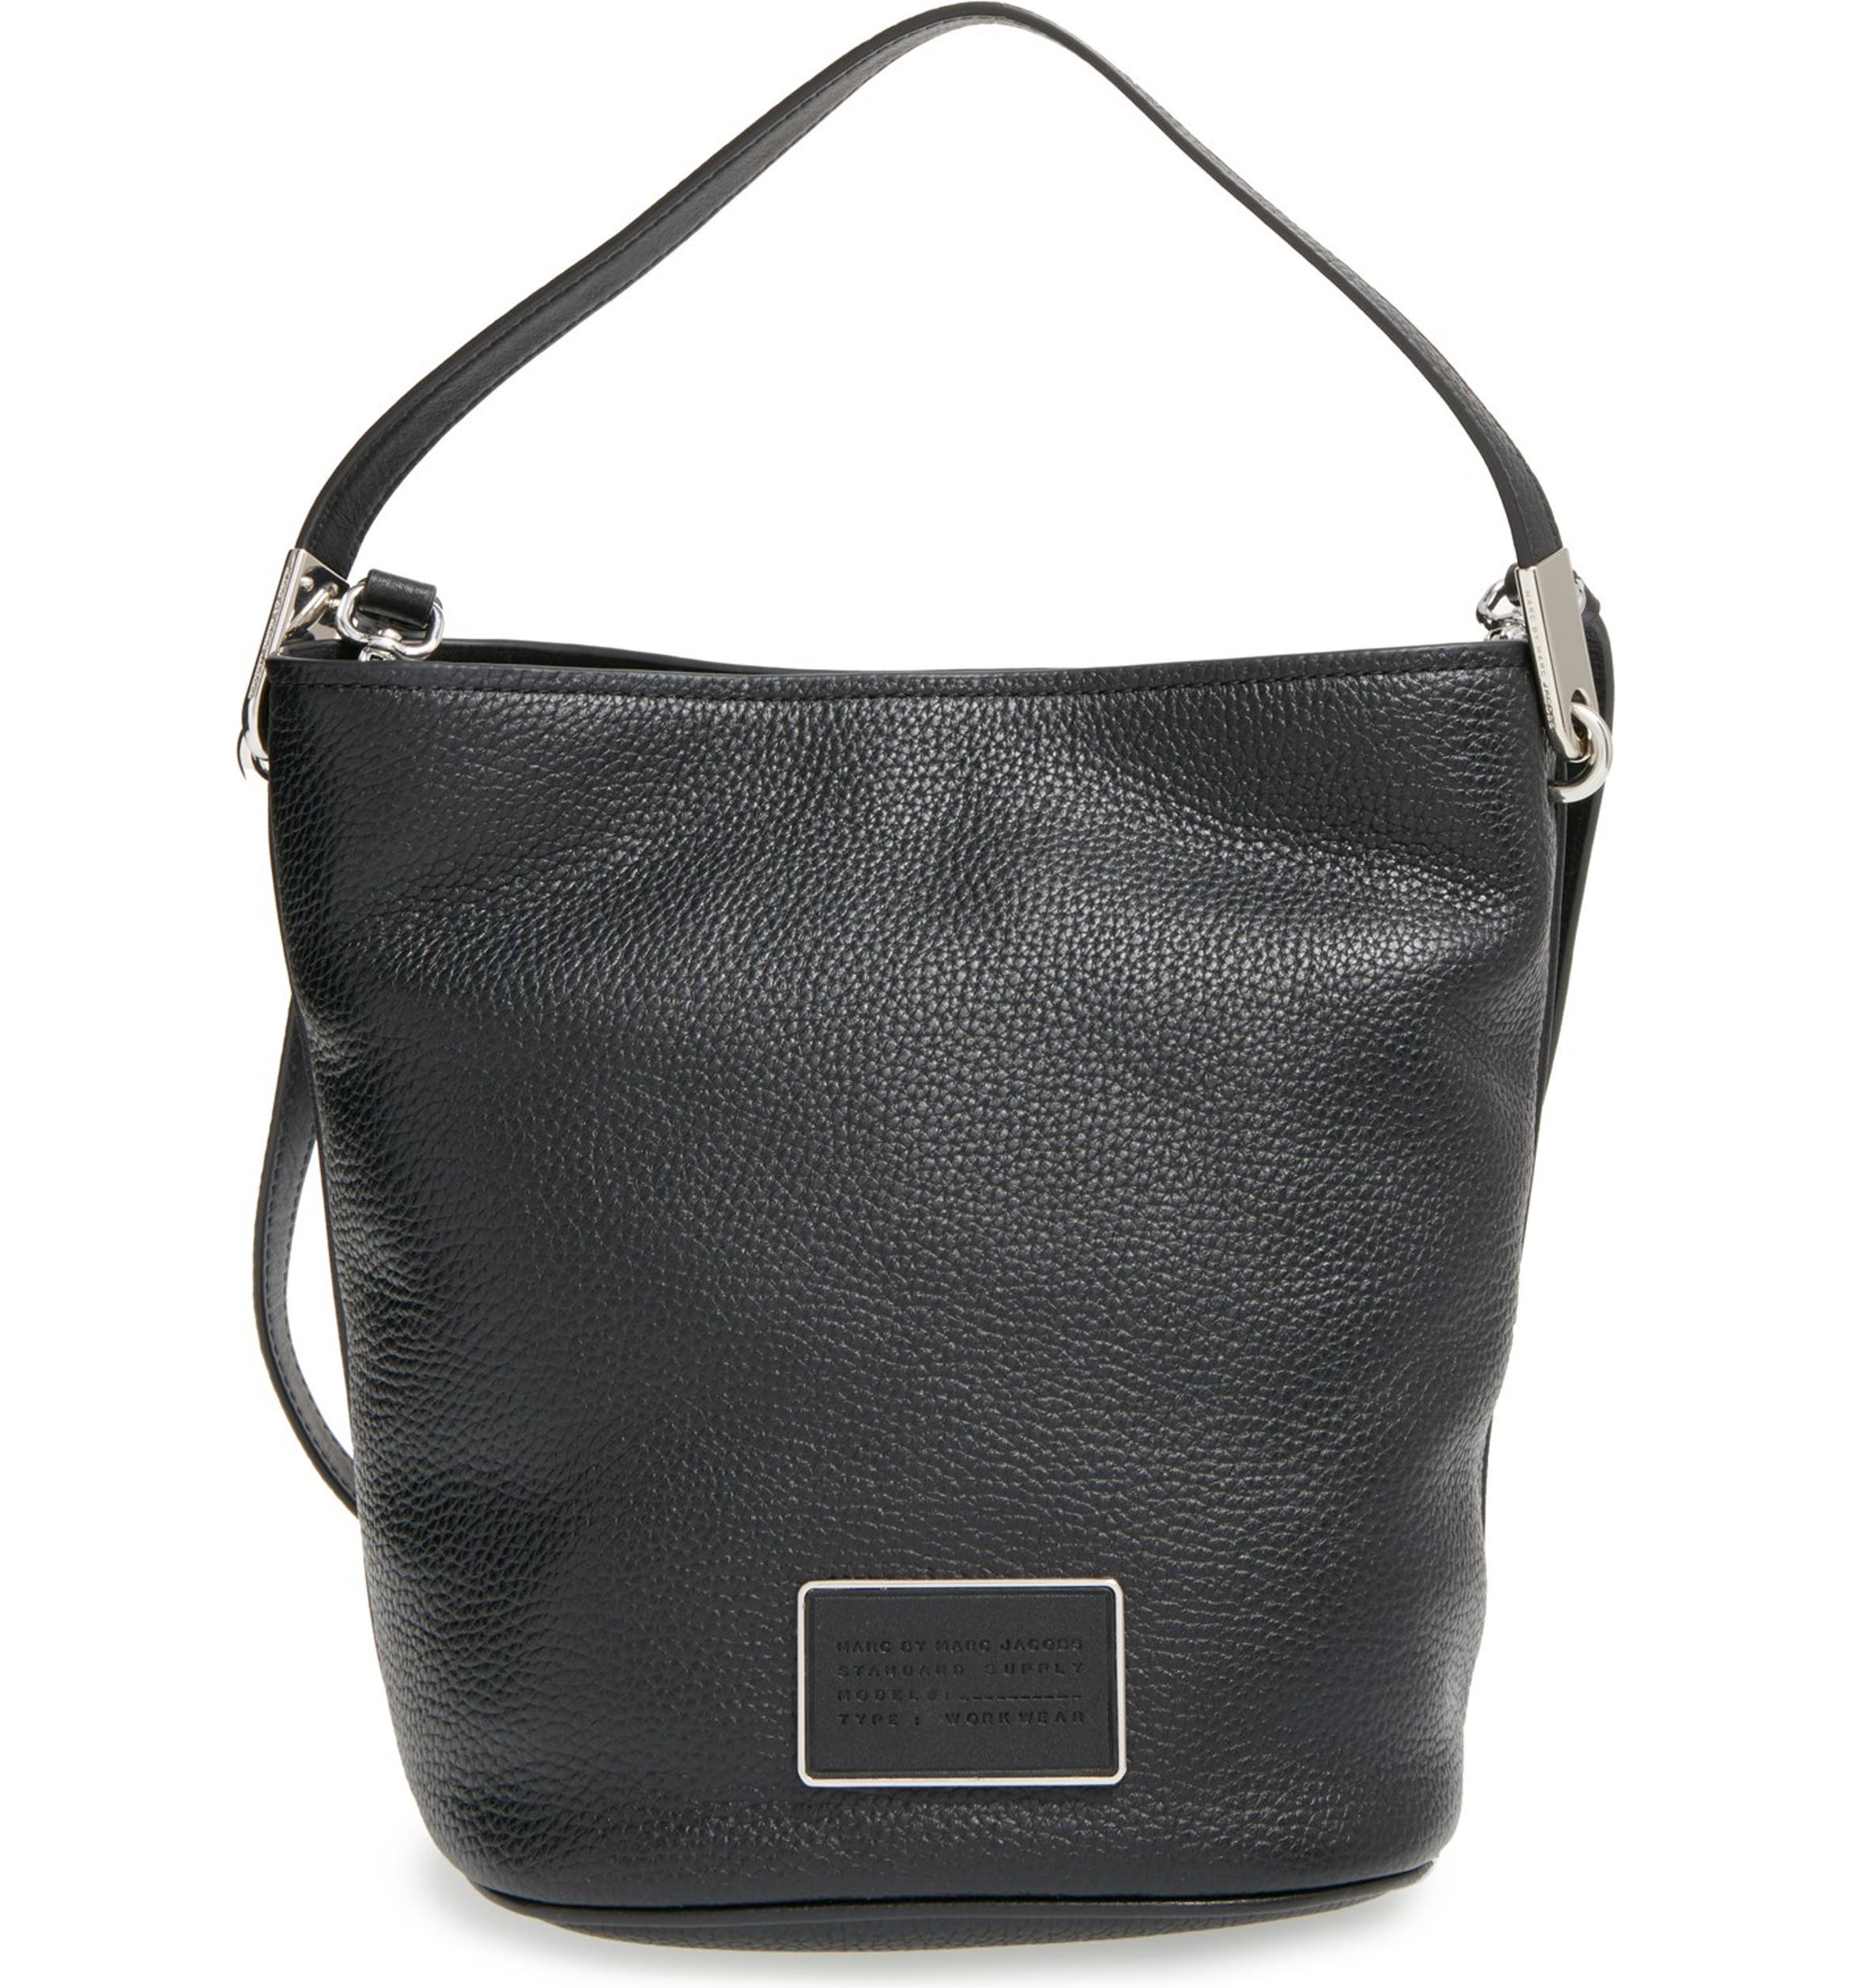 MARC BY MARC JACOBS 'Ligero' Bucket Bag | Nordstrom